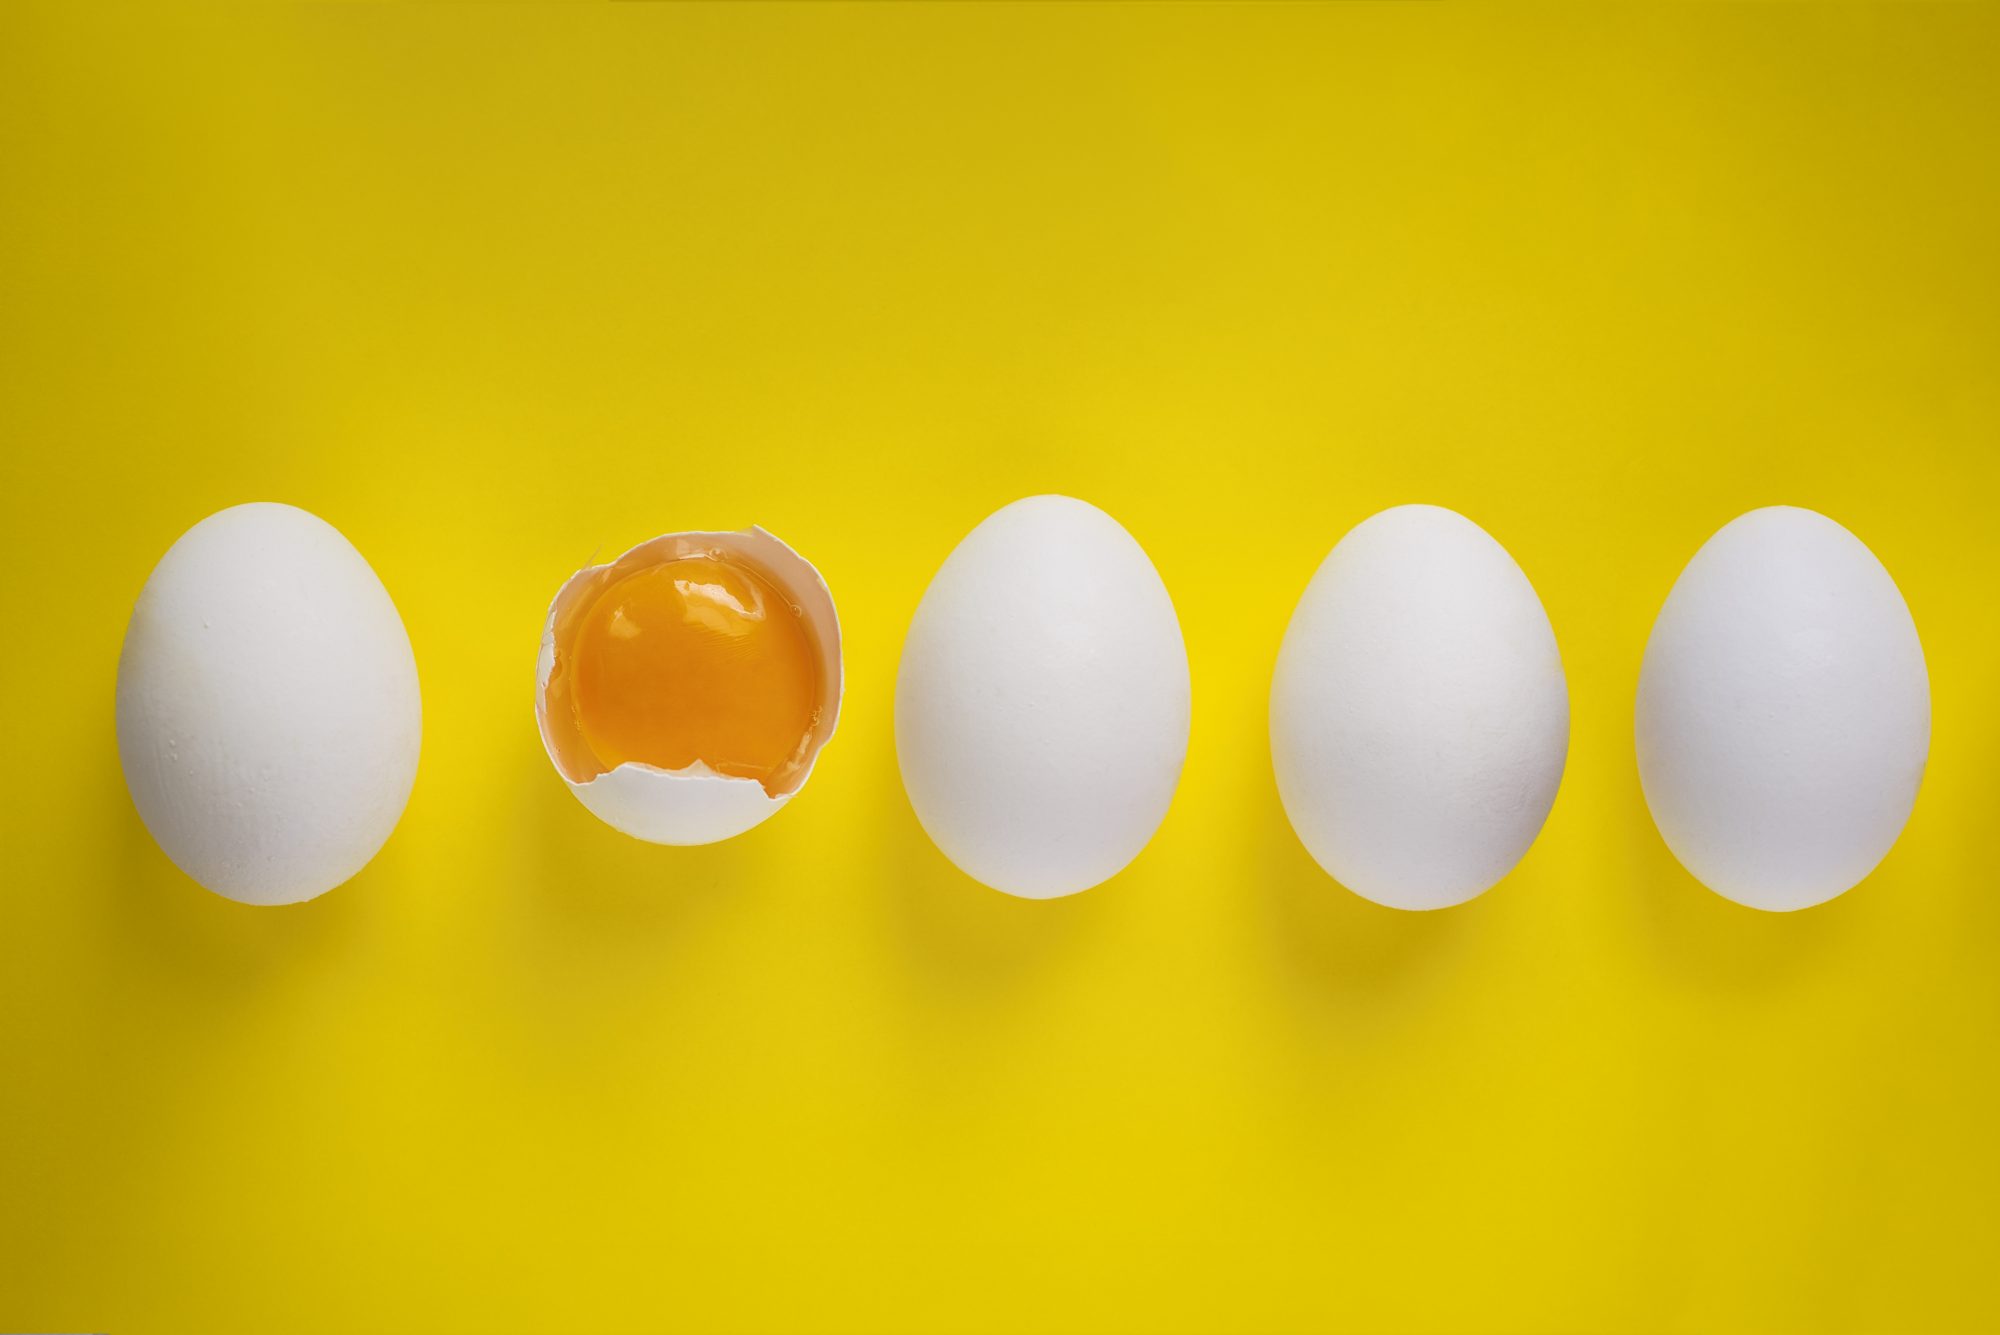 Egg on Yellow Background Getty 3/26/20